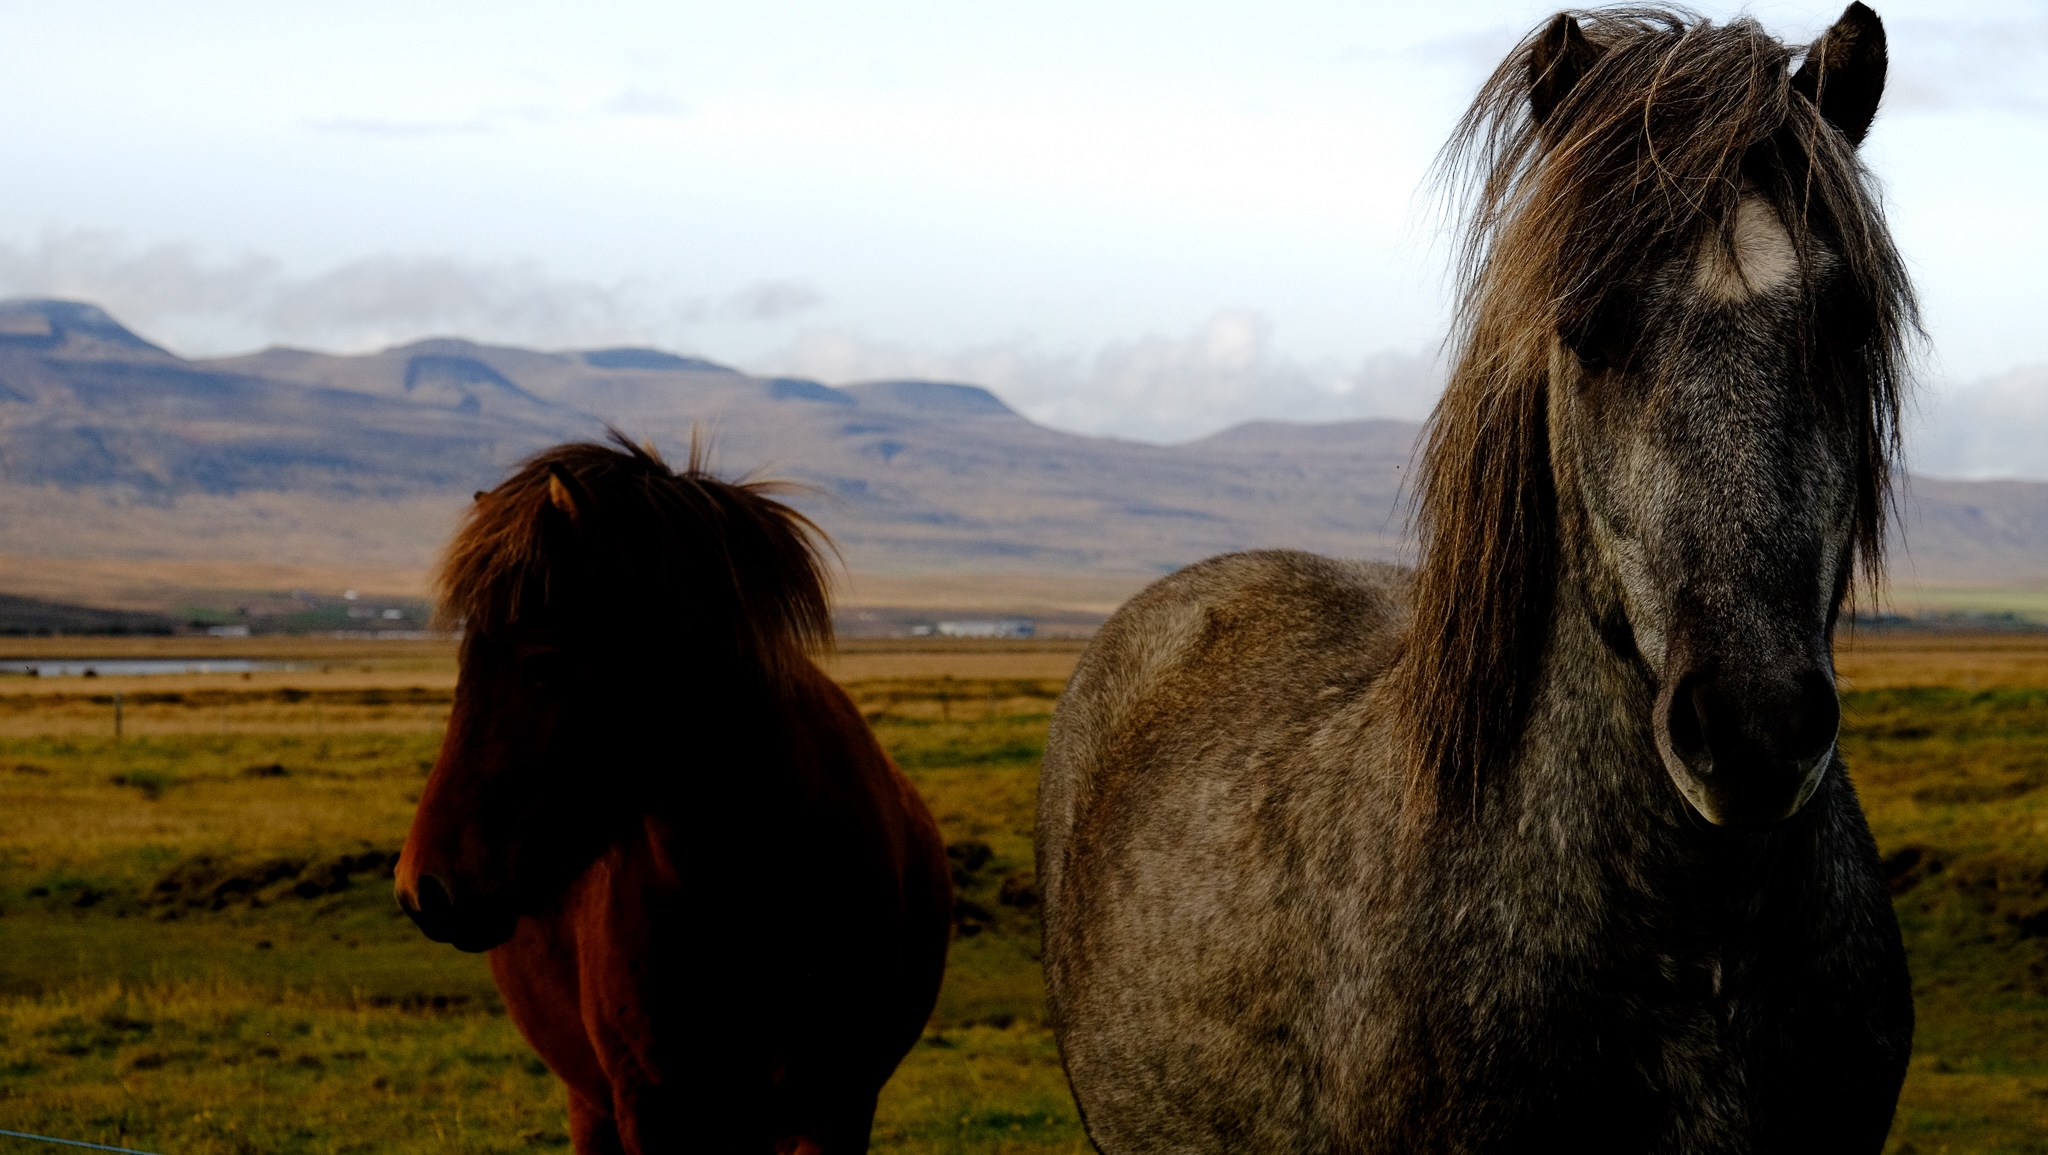 A brown and a mottled grey horse stand in a field with mountains in the background